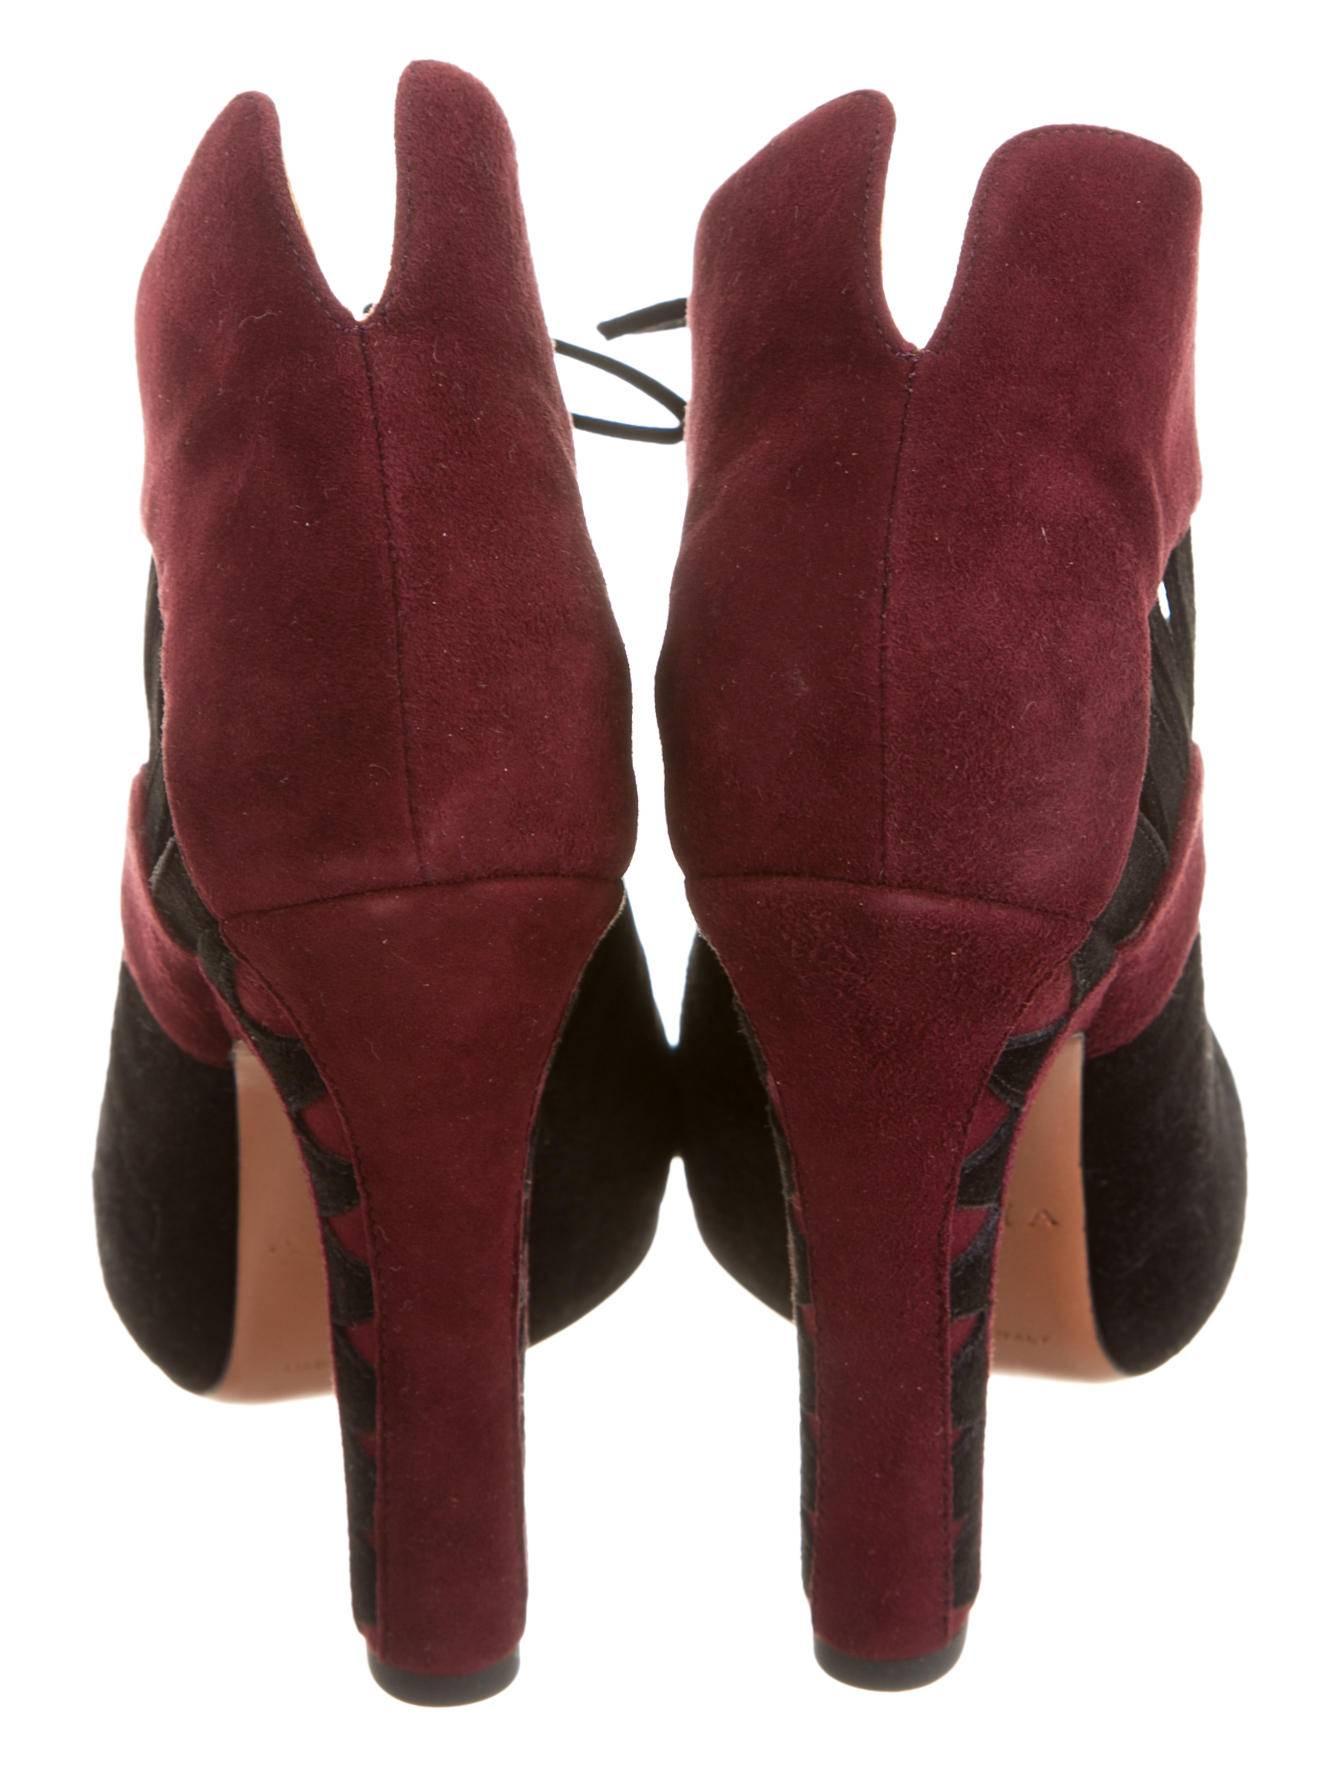 Alaia NEW & SOLD OUT Burgundy Black SuedeCut Out Lace Up Ankle Booties in Box  1